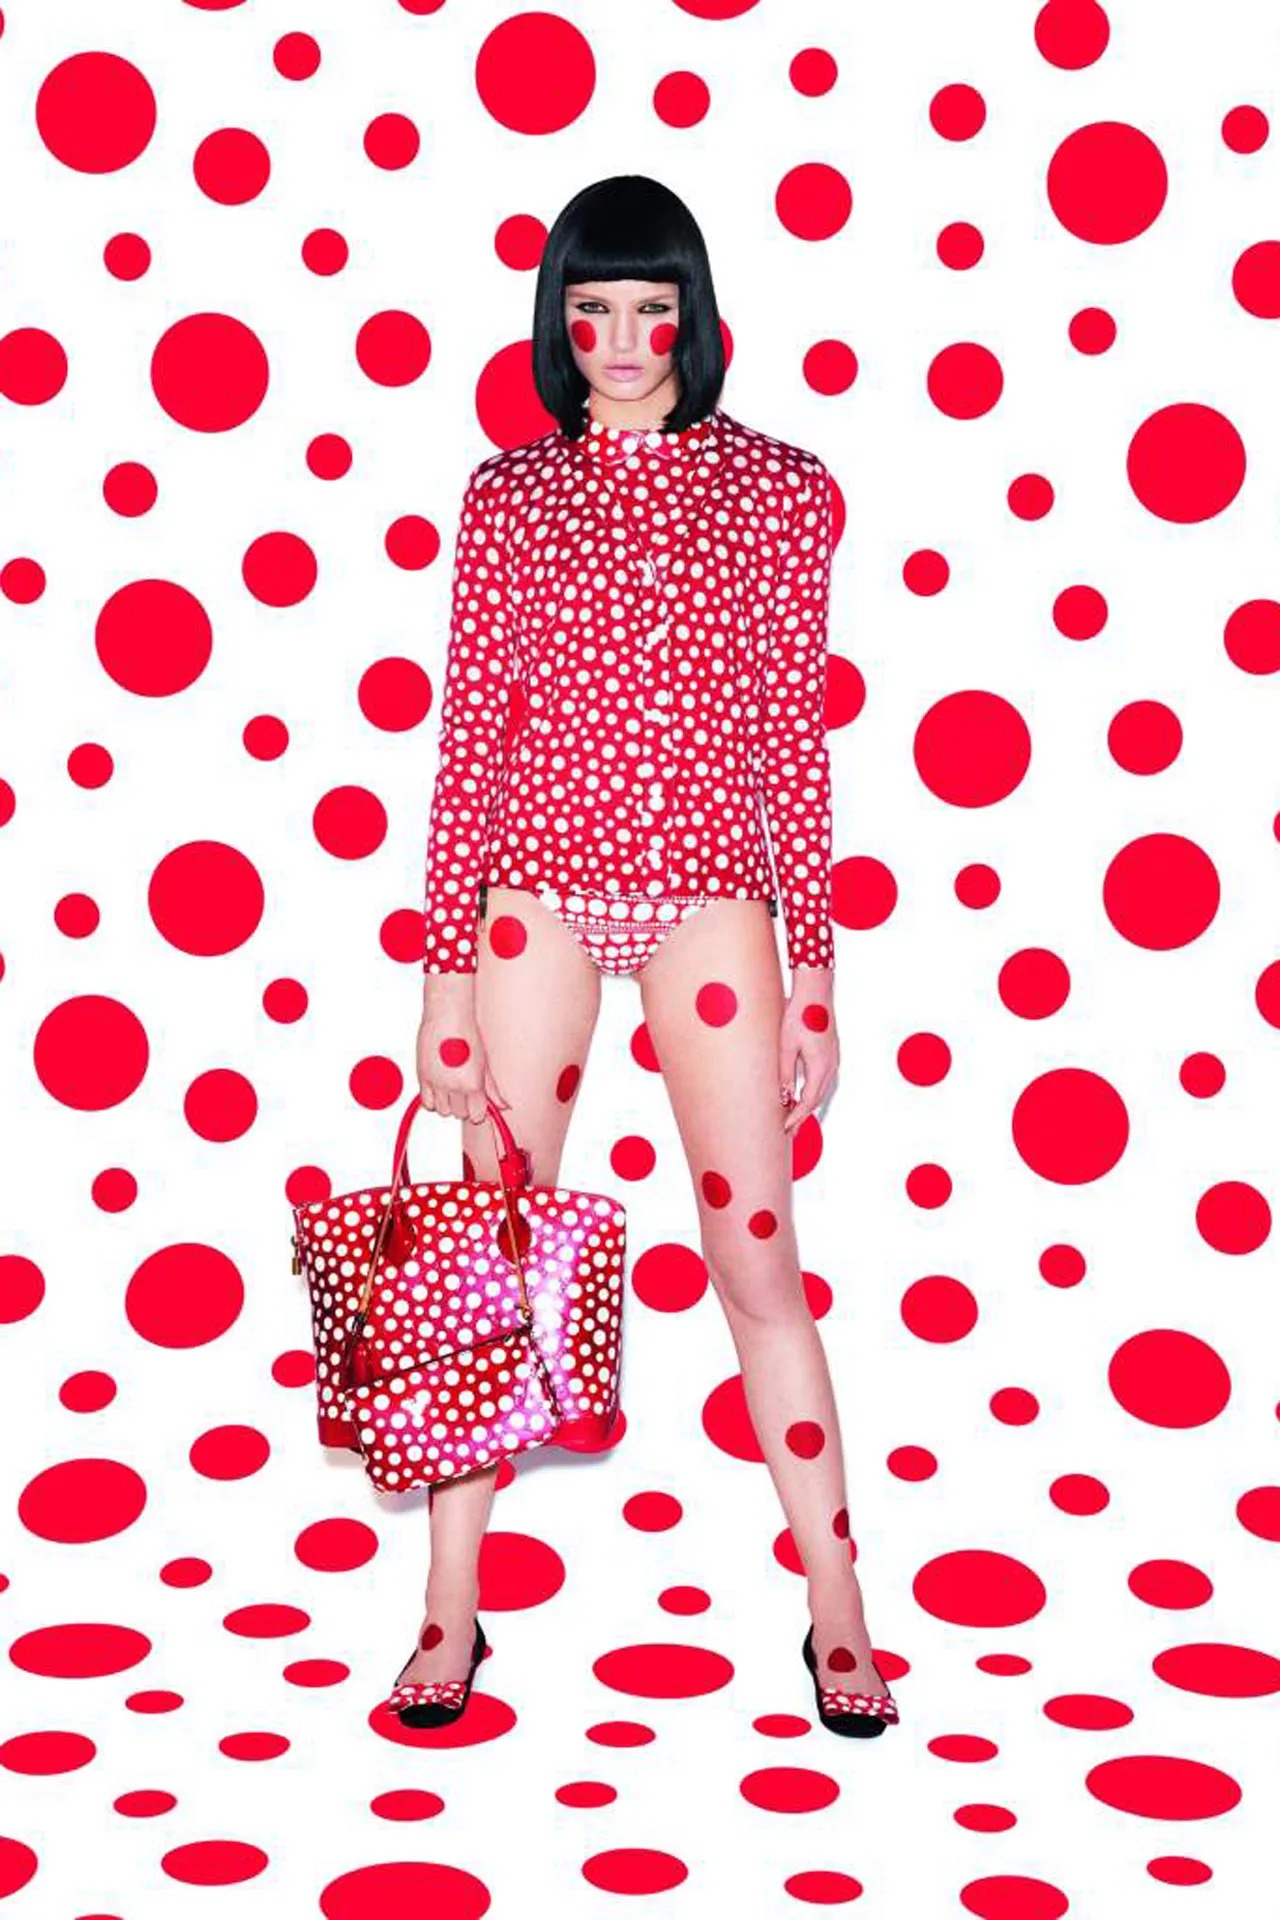 Louis Vuitton x Yayoi Kusama Collection, Presented in Dedicated Pop-Ups